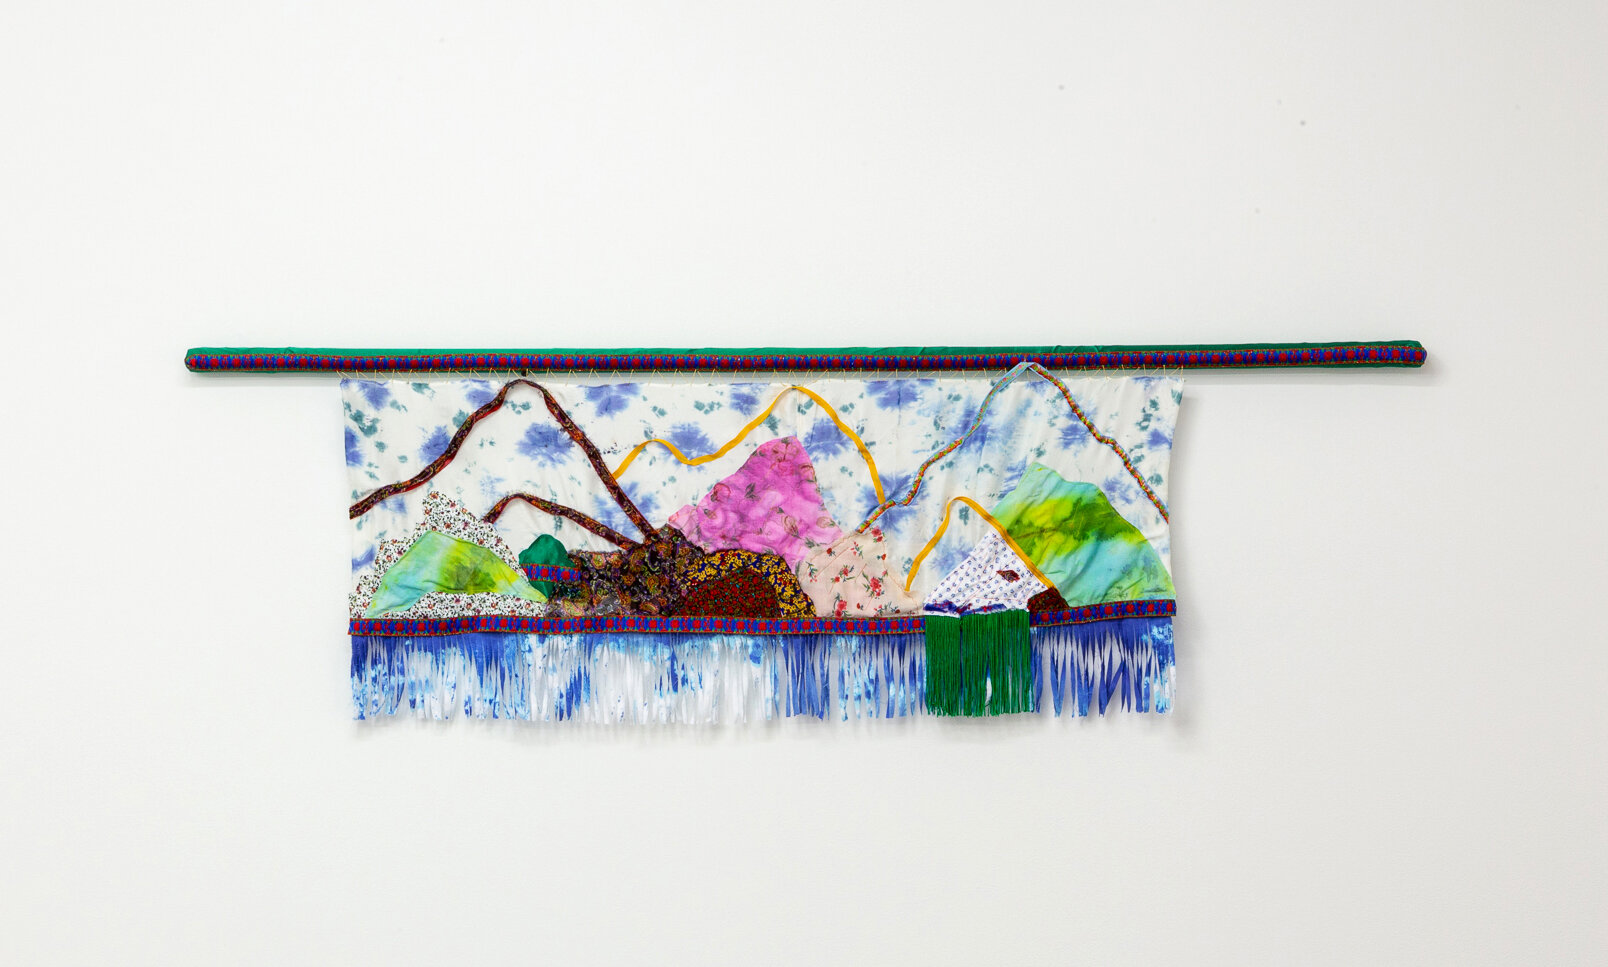  Leila Seyedzadeh,  An absent view,  2021, hand-dyed silk and Cotton cloth, found cloth, fringe, ribbon, wooden bar, 65” x 20” 